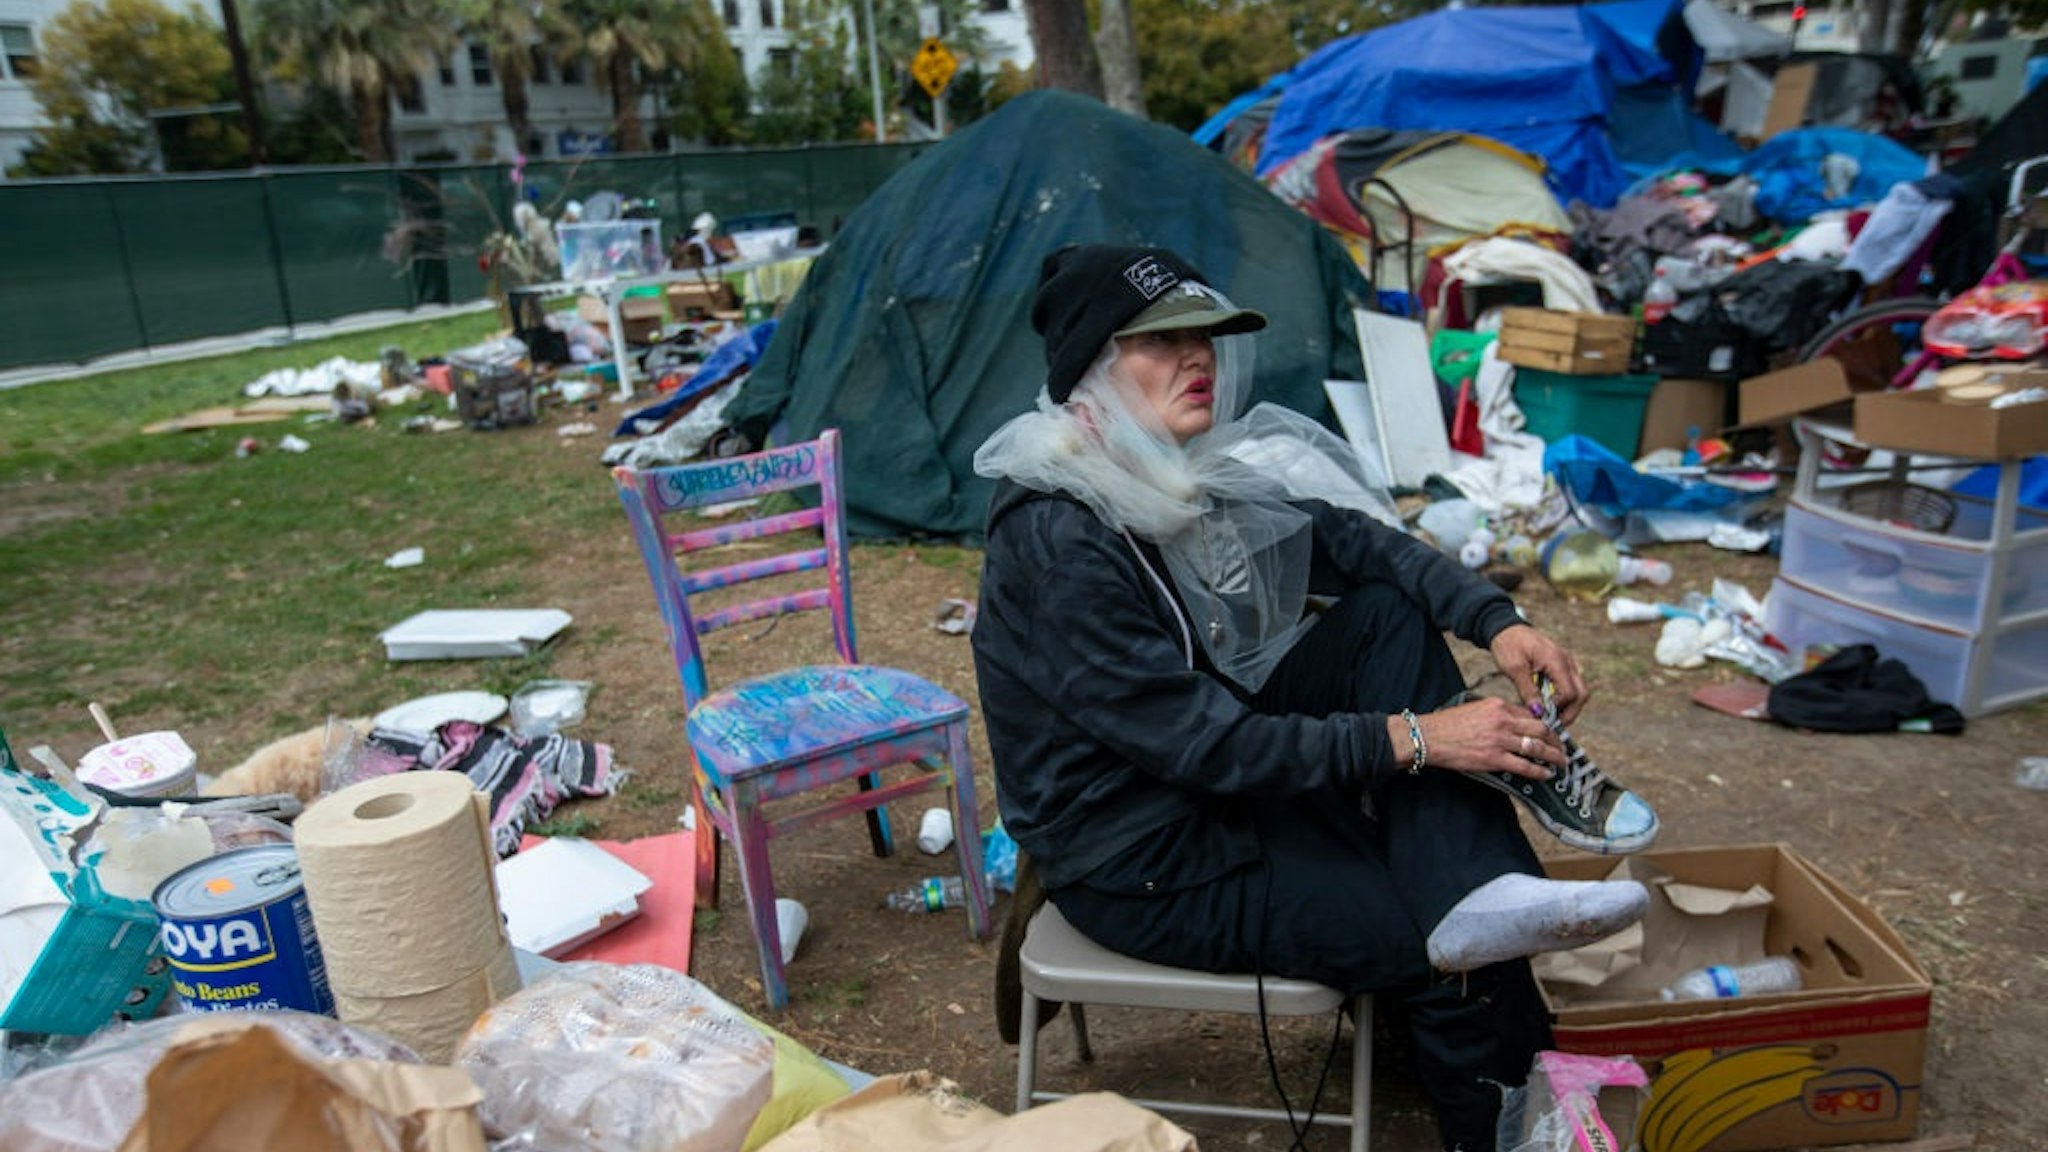 LOS ANGELES, CA - MARCH 25: Still wearing her wedding vail Valerie Zeller puts on her shoes as she is packing outside her tent next other tents at Echo Park Lake Thursday, March 25, 2021 in Los Angeles, CA.